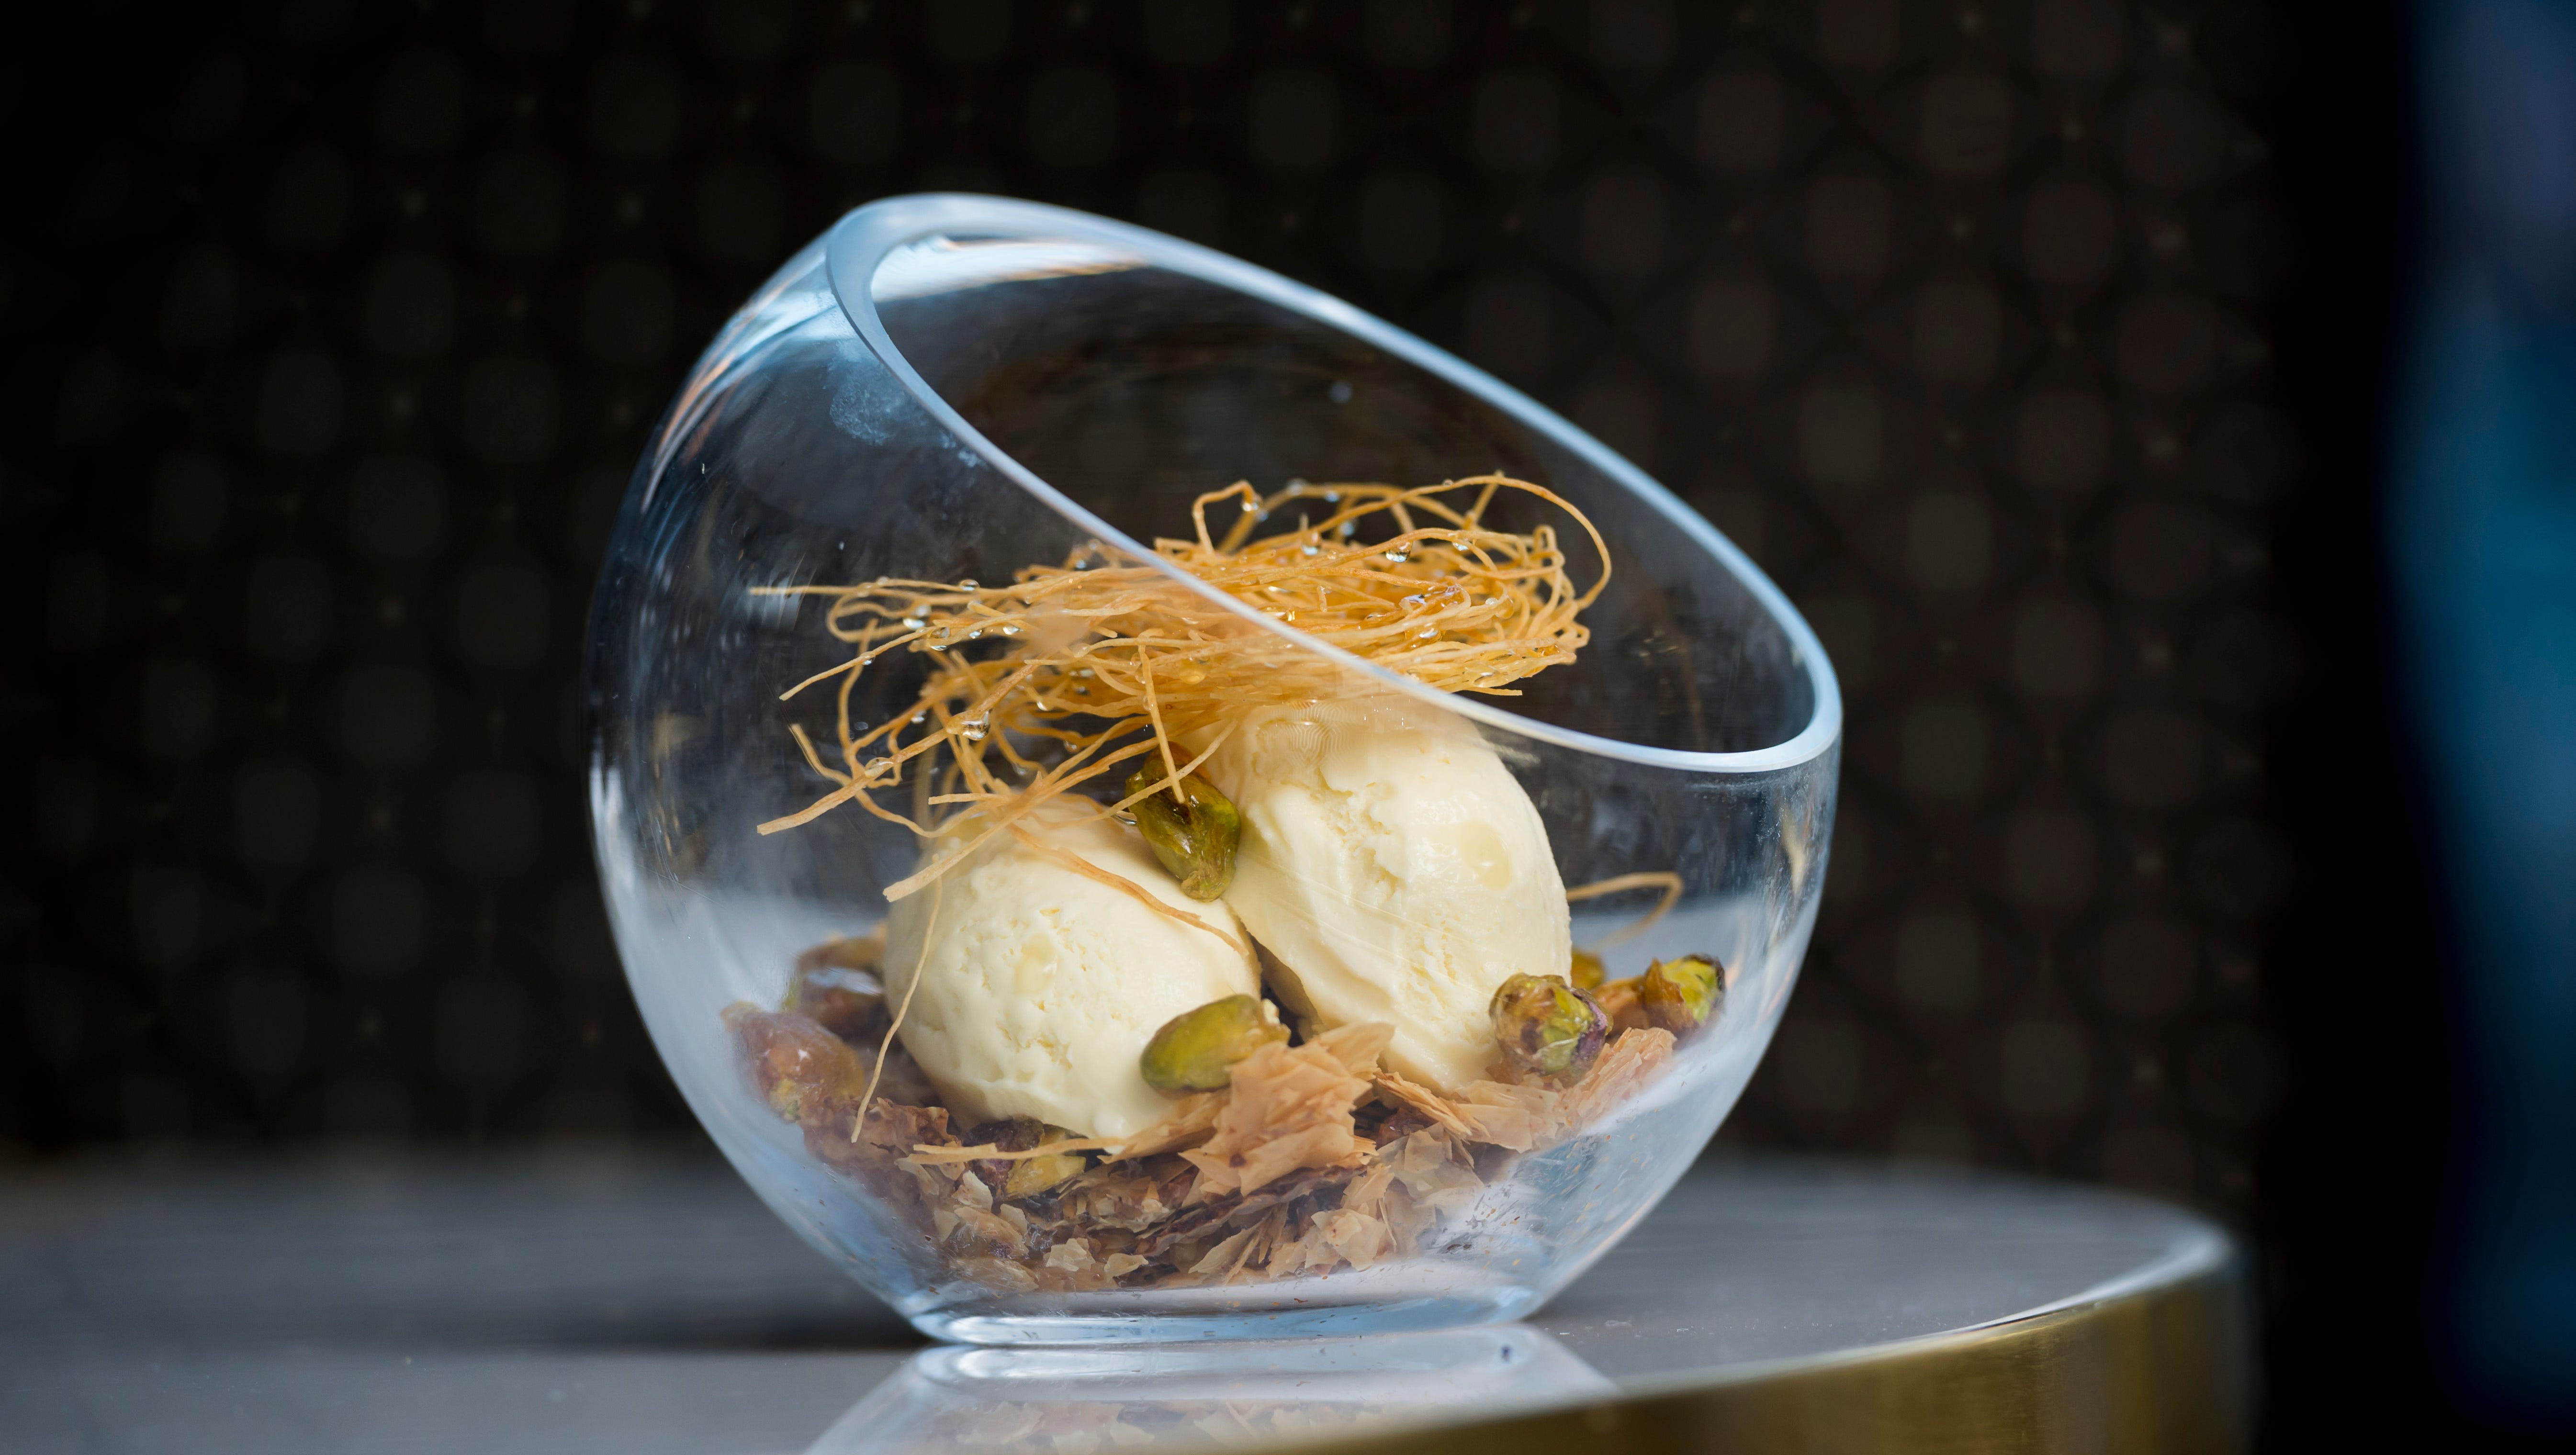 The baklava sundae with Michigan honey ice cream, candied pistachios, and shredded phyllo at Prime + Proper restaurant in Detroit.